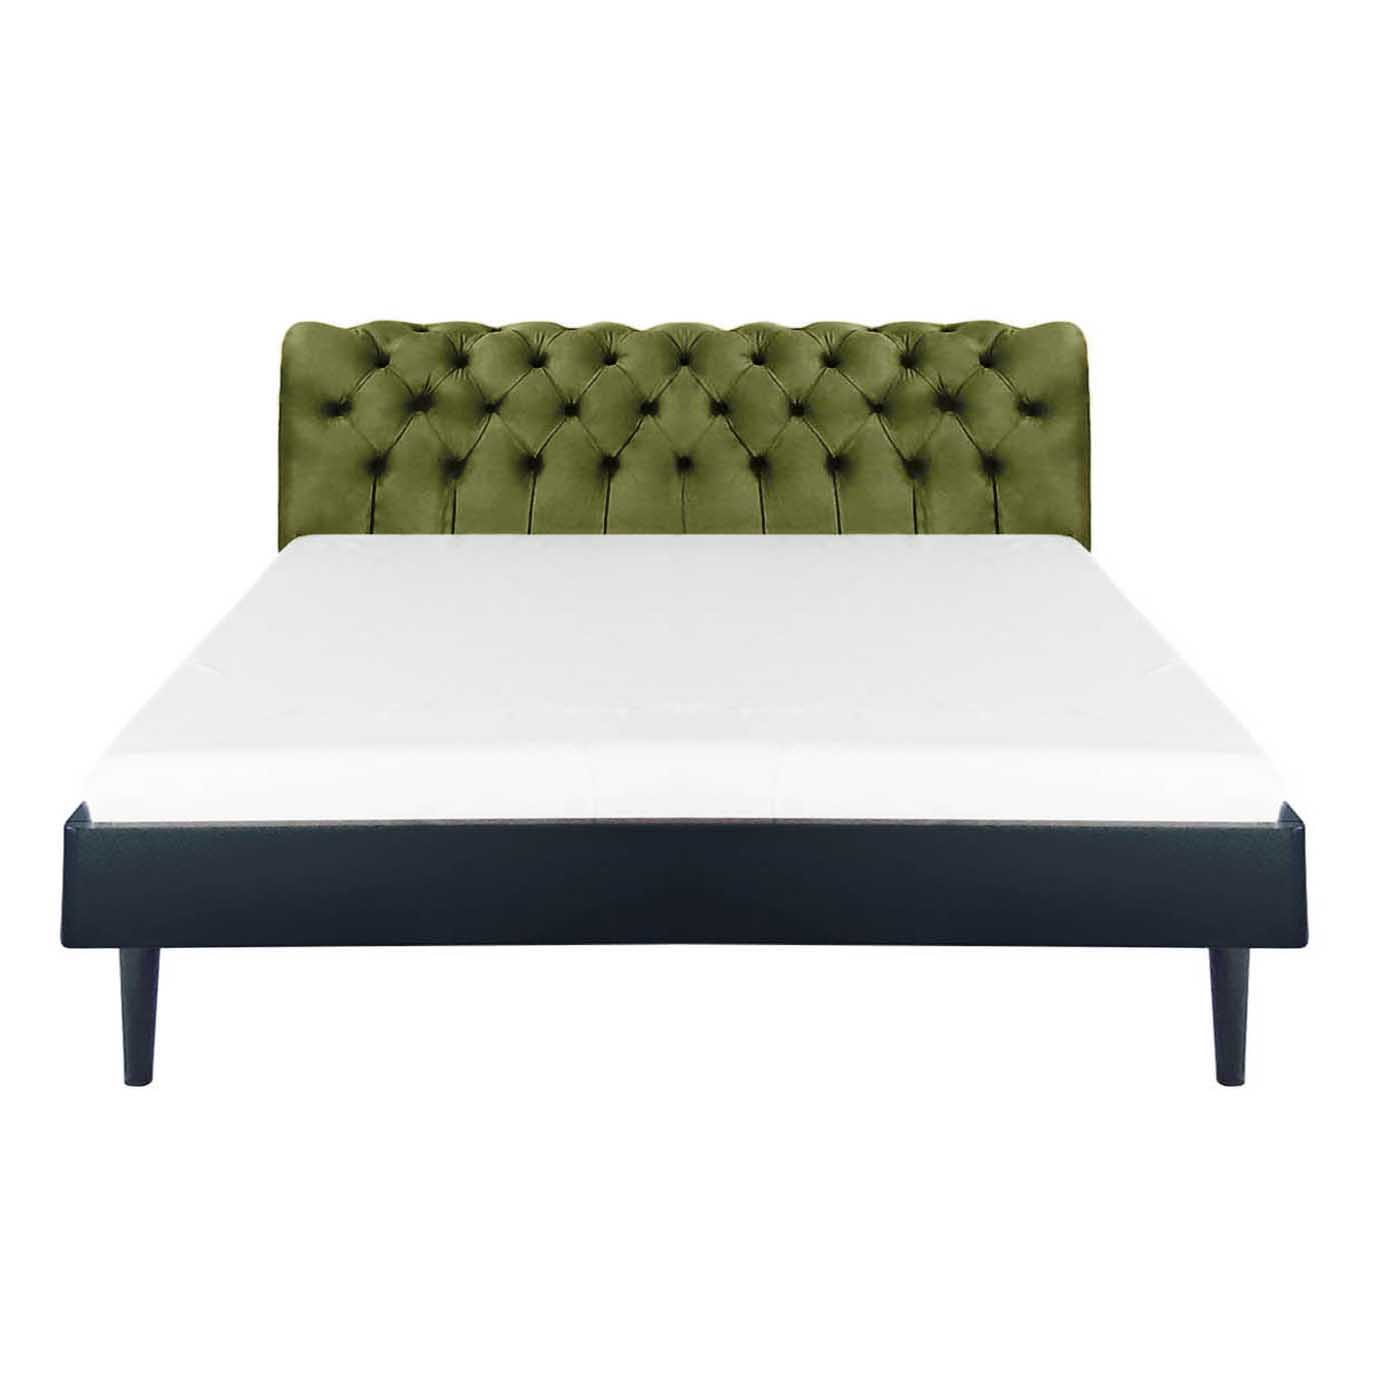 Chesterfield Olive Stitch Black King Bed